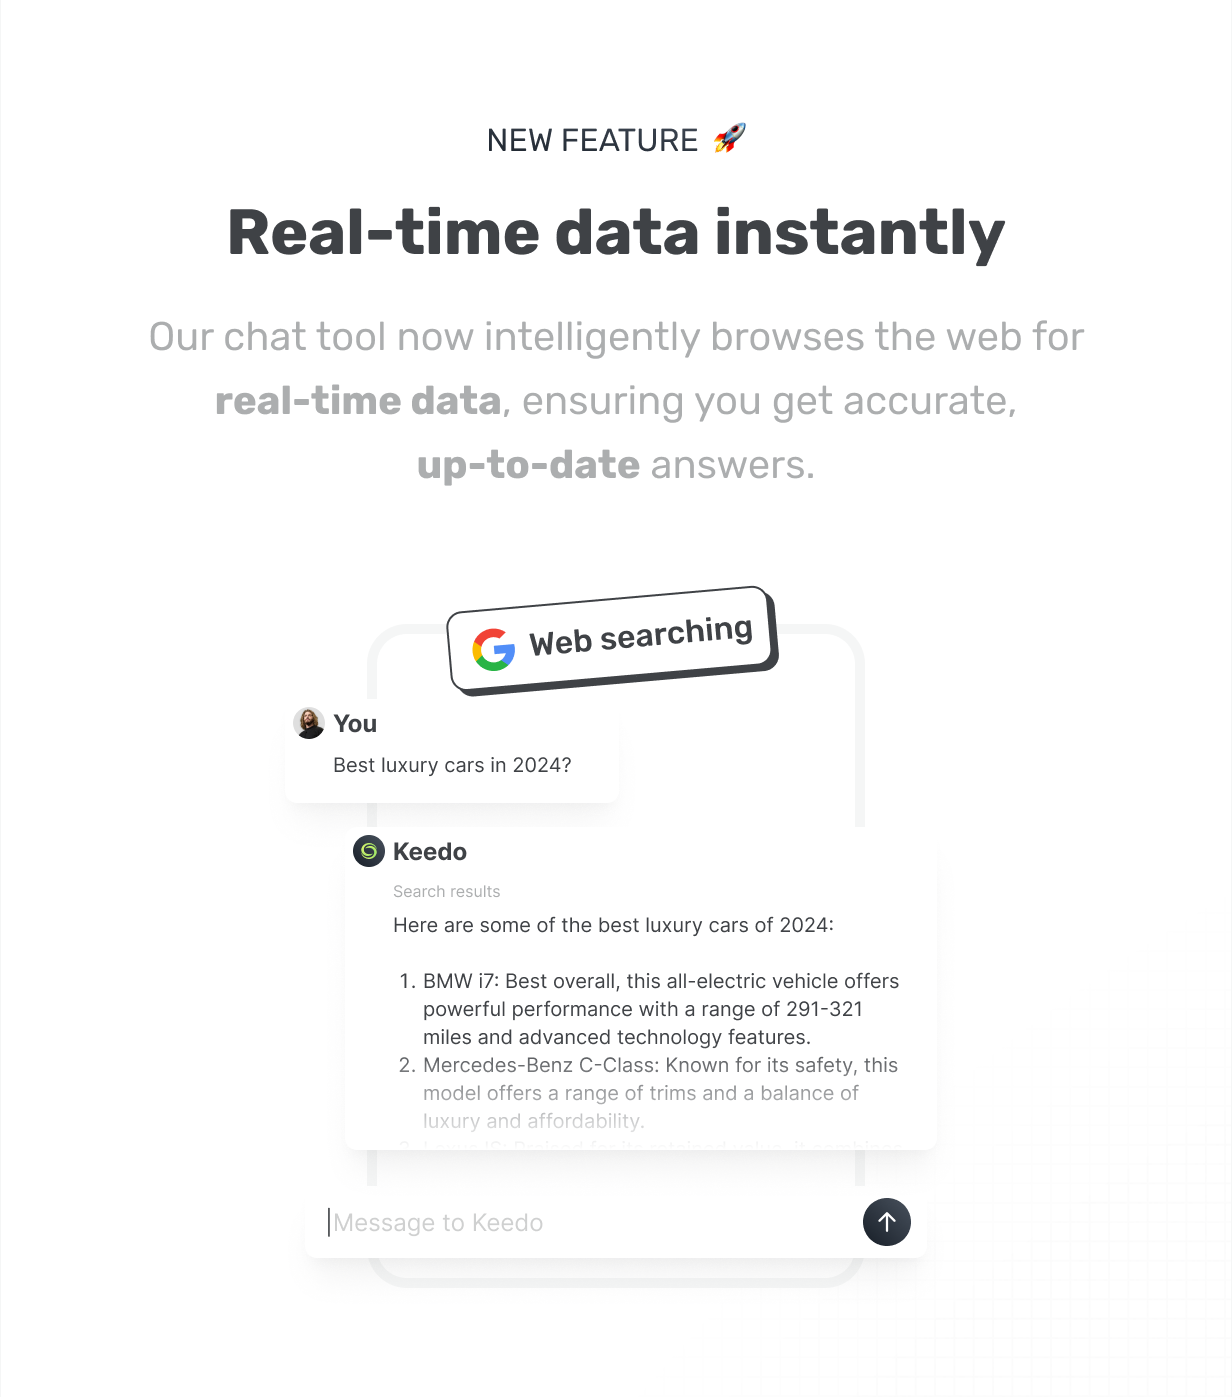 Real-Time Data at Your Fingertips - Our chat tool now has web browsing capabilities! It intelligently searches for real-time data and determines when browsing is necessary to provide you with accurate and up-to-date answers. @heyaikeedo #aikeedo